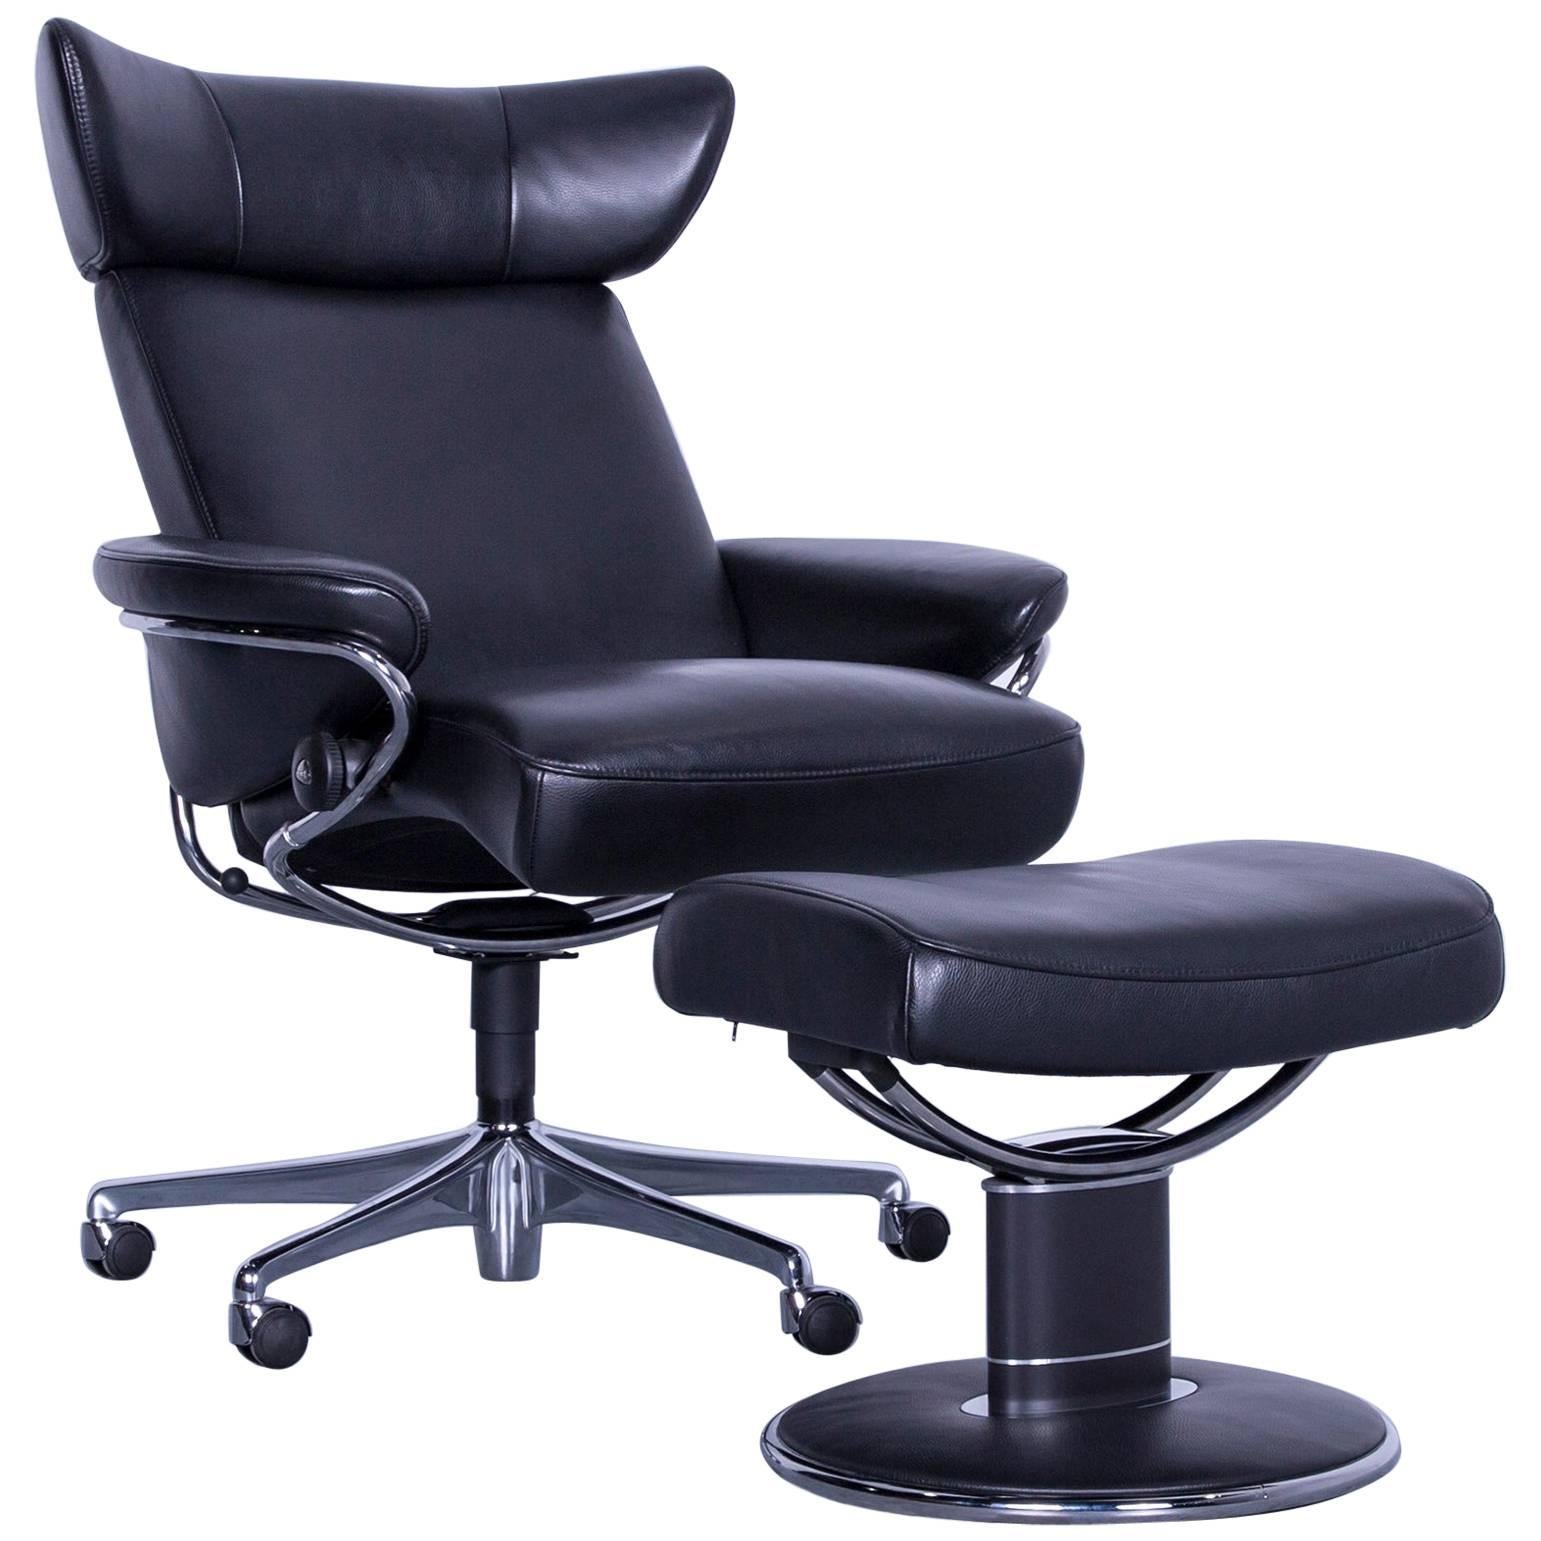 Stressless Jazz Designer Leather Office Chair Black with Footstool and Function